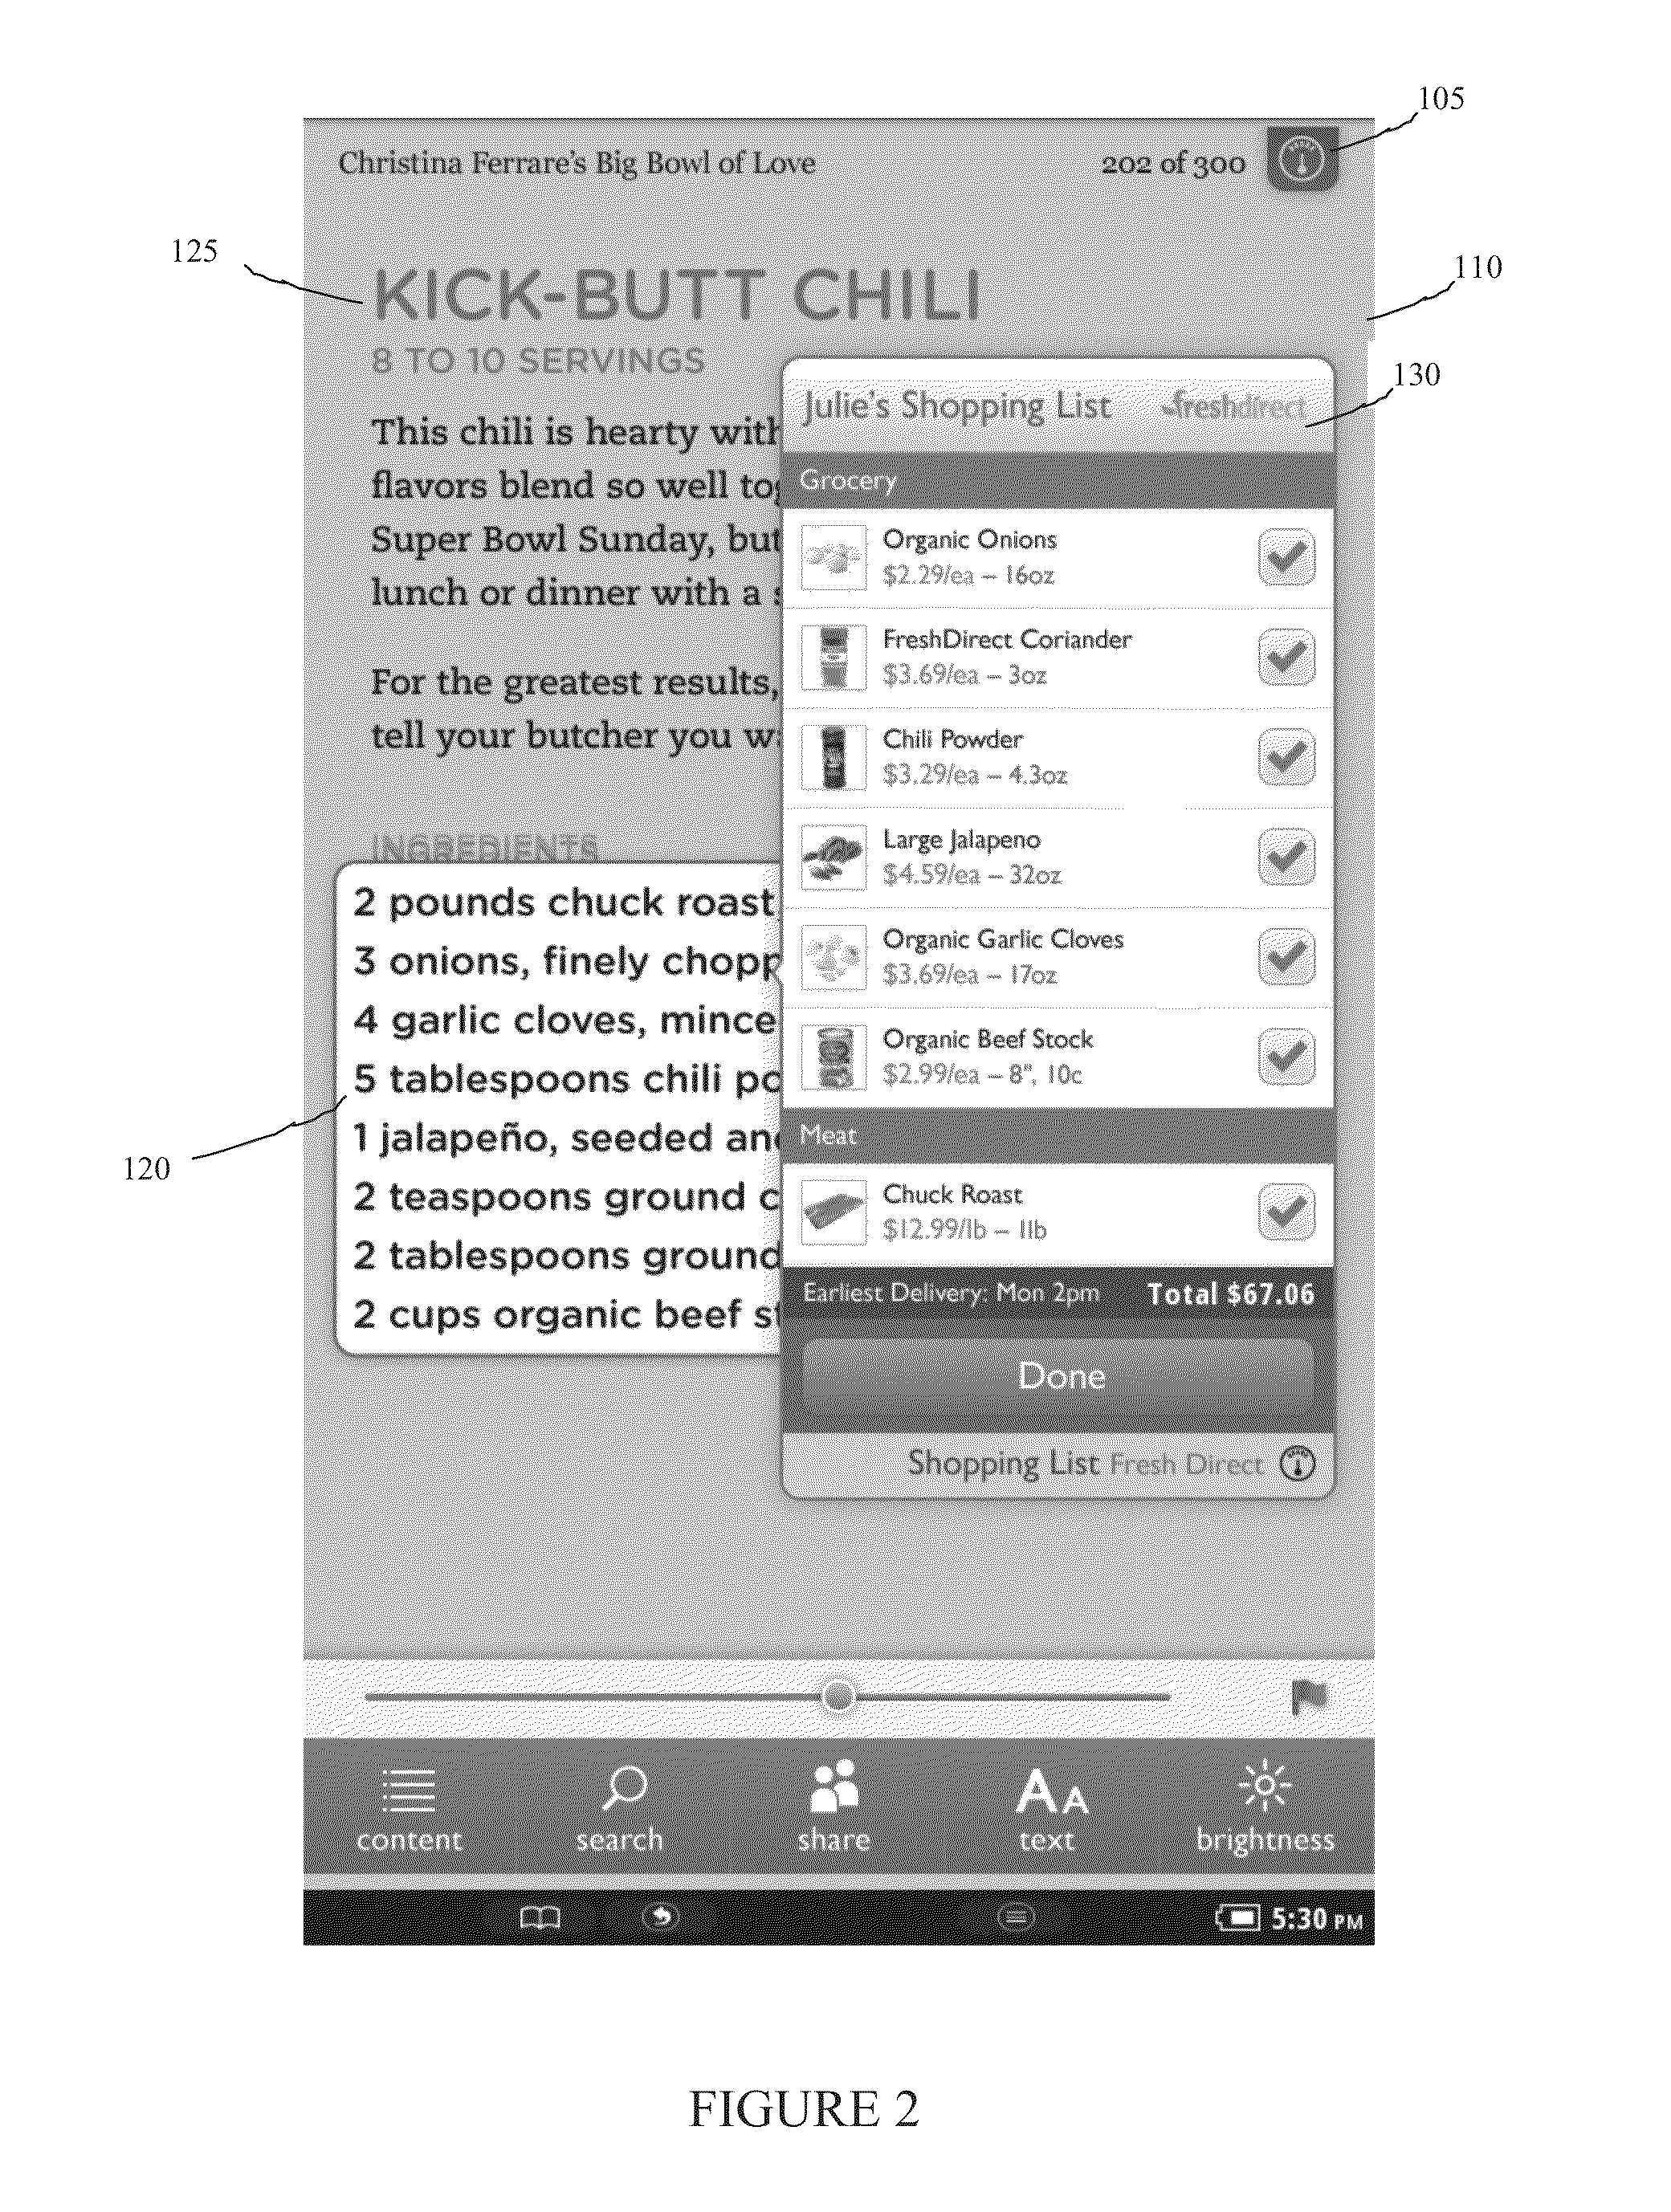 System and method for incorporating and using widgets in an electronic publication